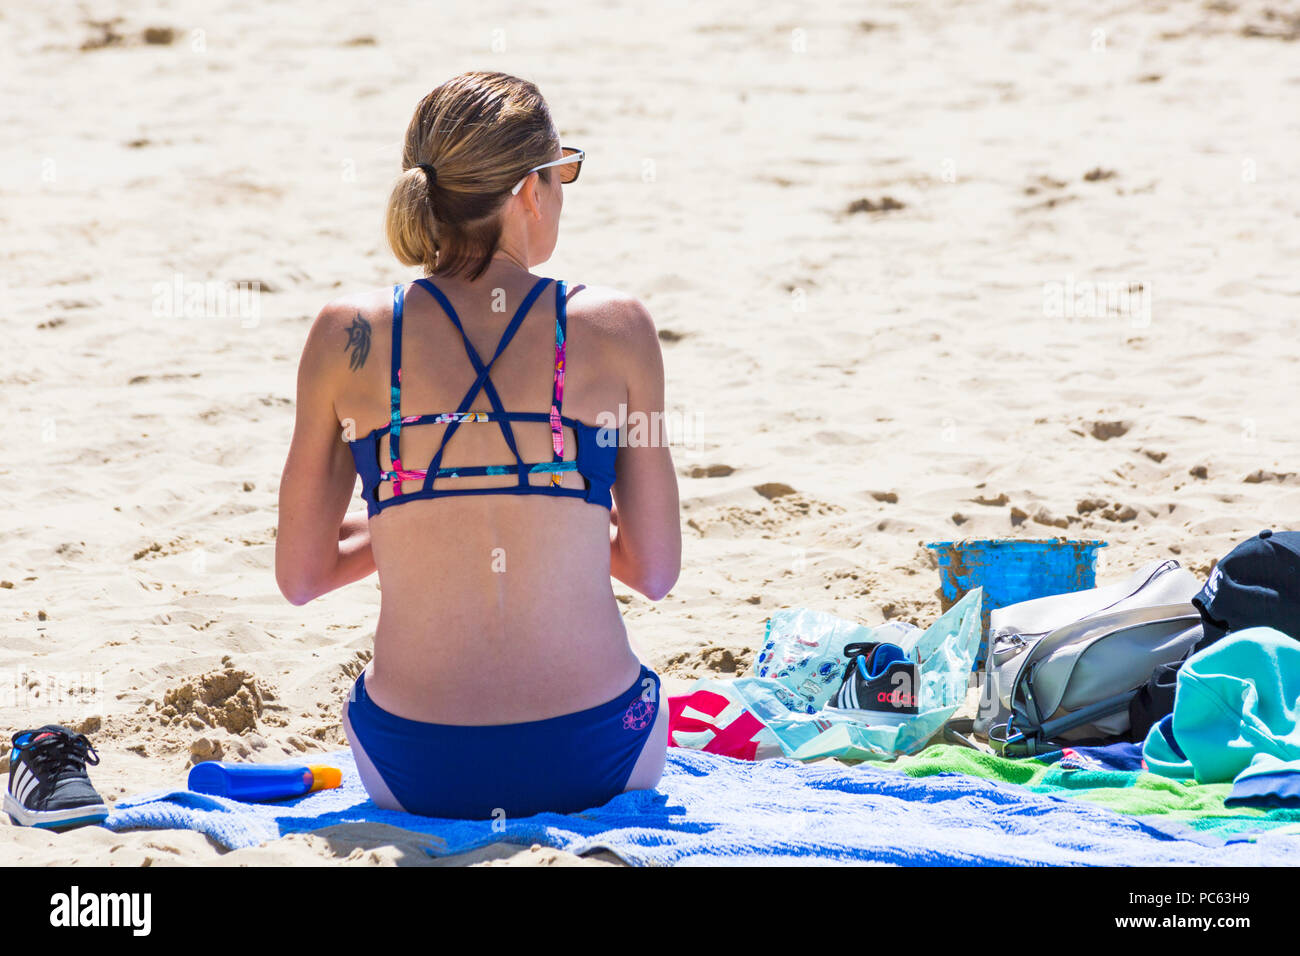 Bournemouth, Dorset, UK. 31st July 2018. UK weather:  the sun returns and temperatures rise as beach-goers head to the seaside to enjoy the warm sunny weather. woman in bikini sunbathing on beach. Credit: Carolyn Jenkins/Alamy Live News Stock Photo